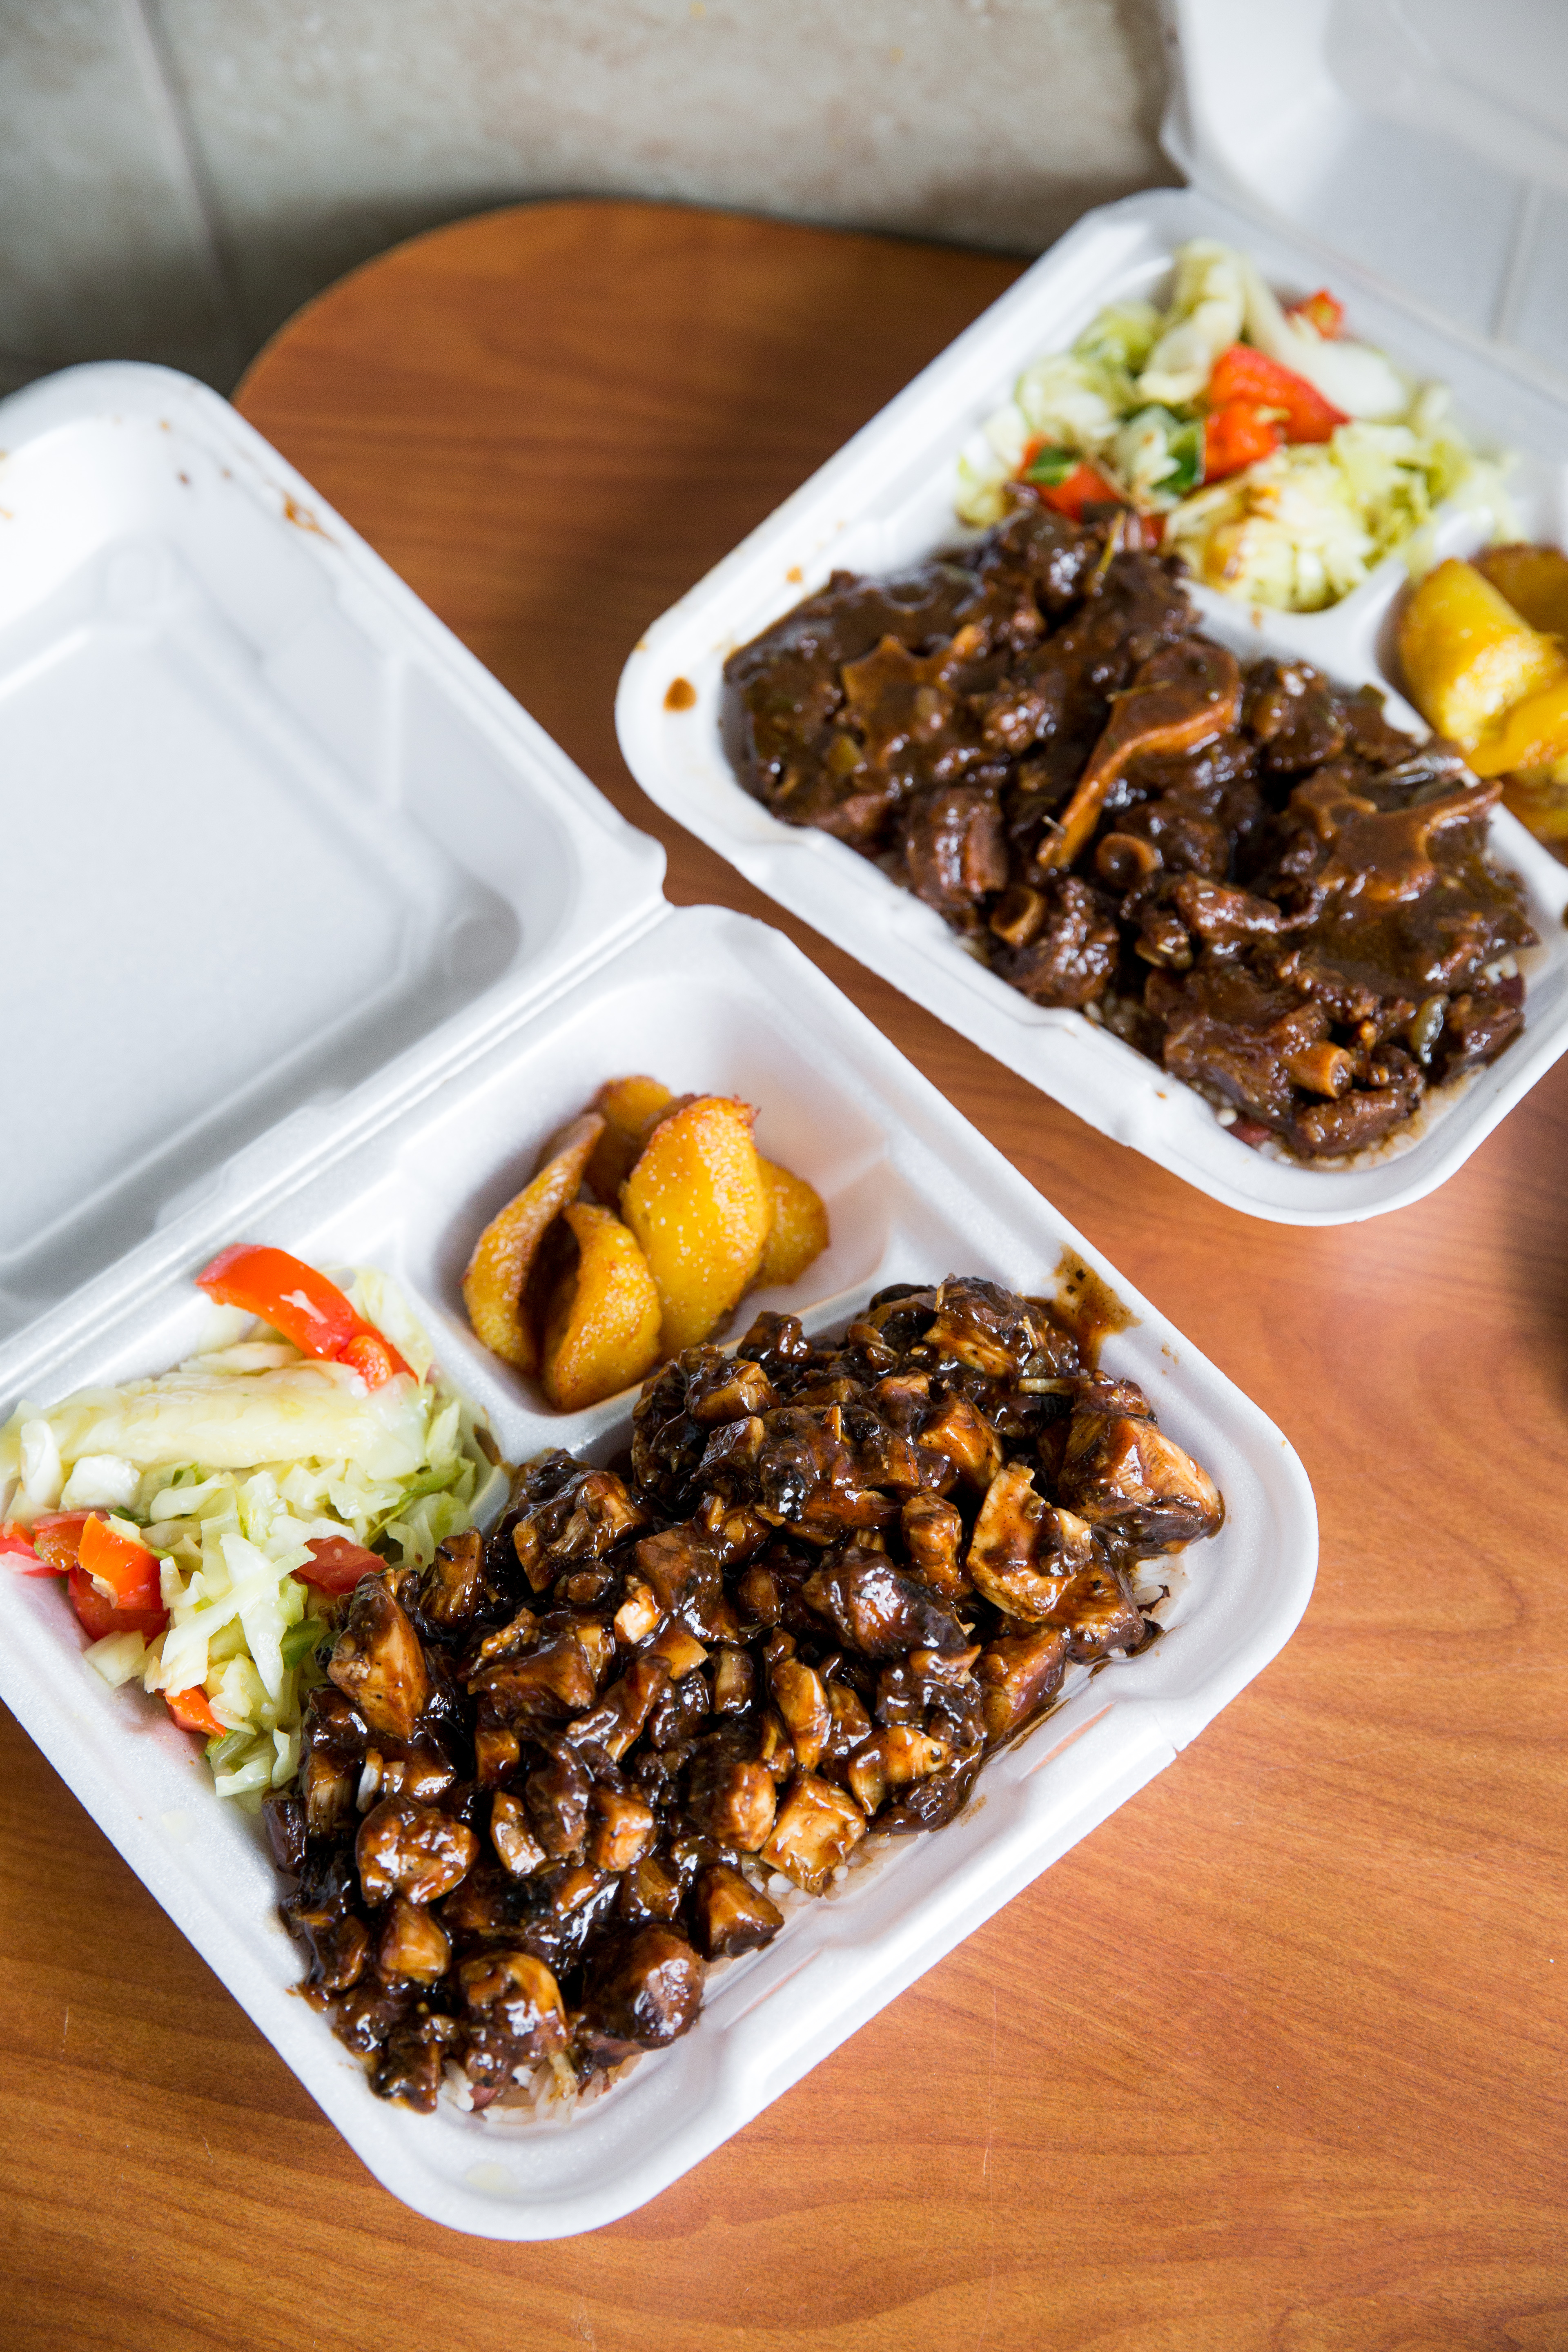 A carryout box filled with curried goat, salad, and plantains.